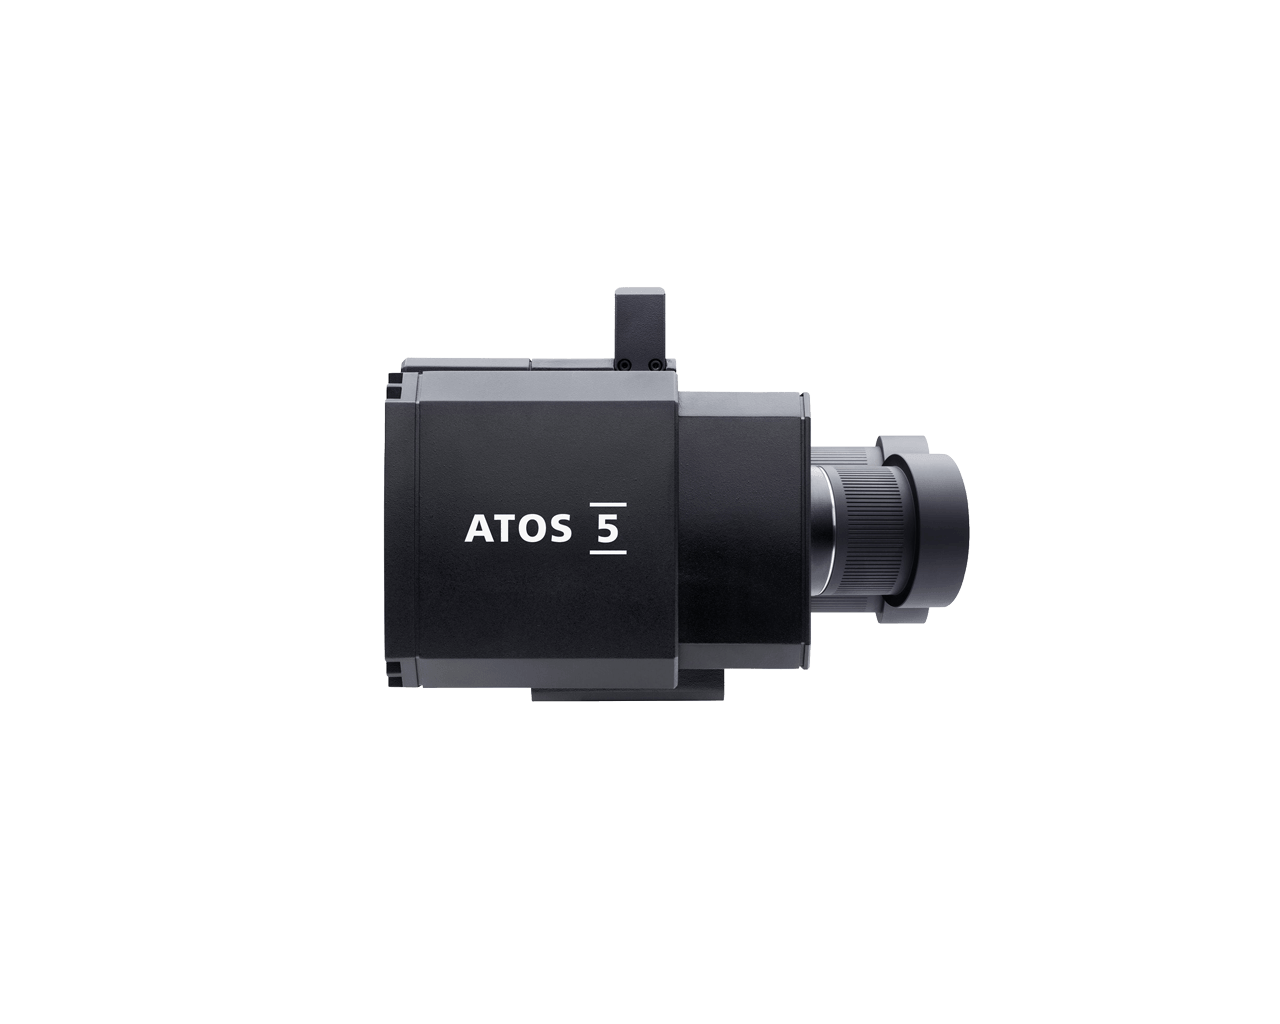 ATOS 5 side view